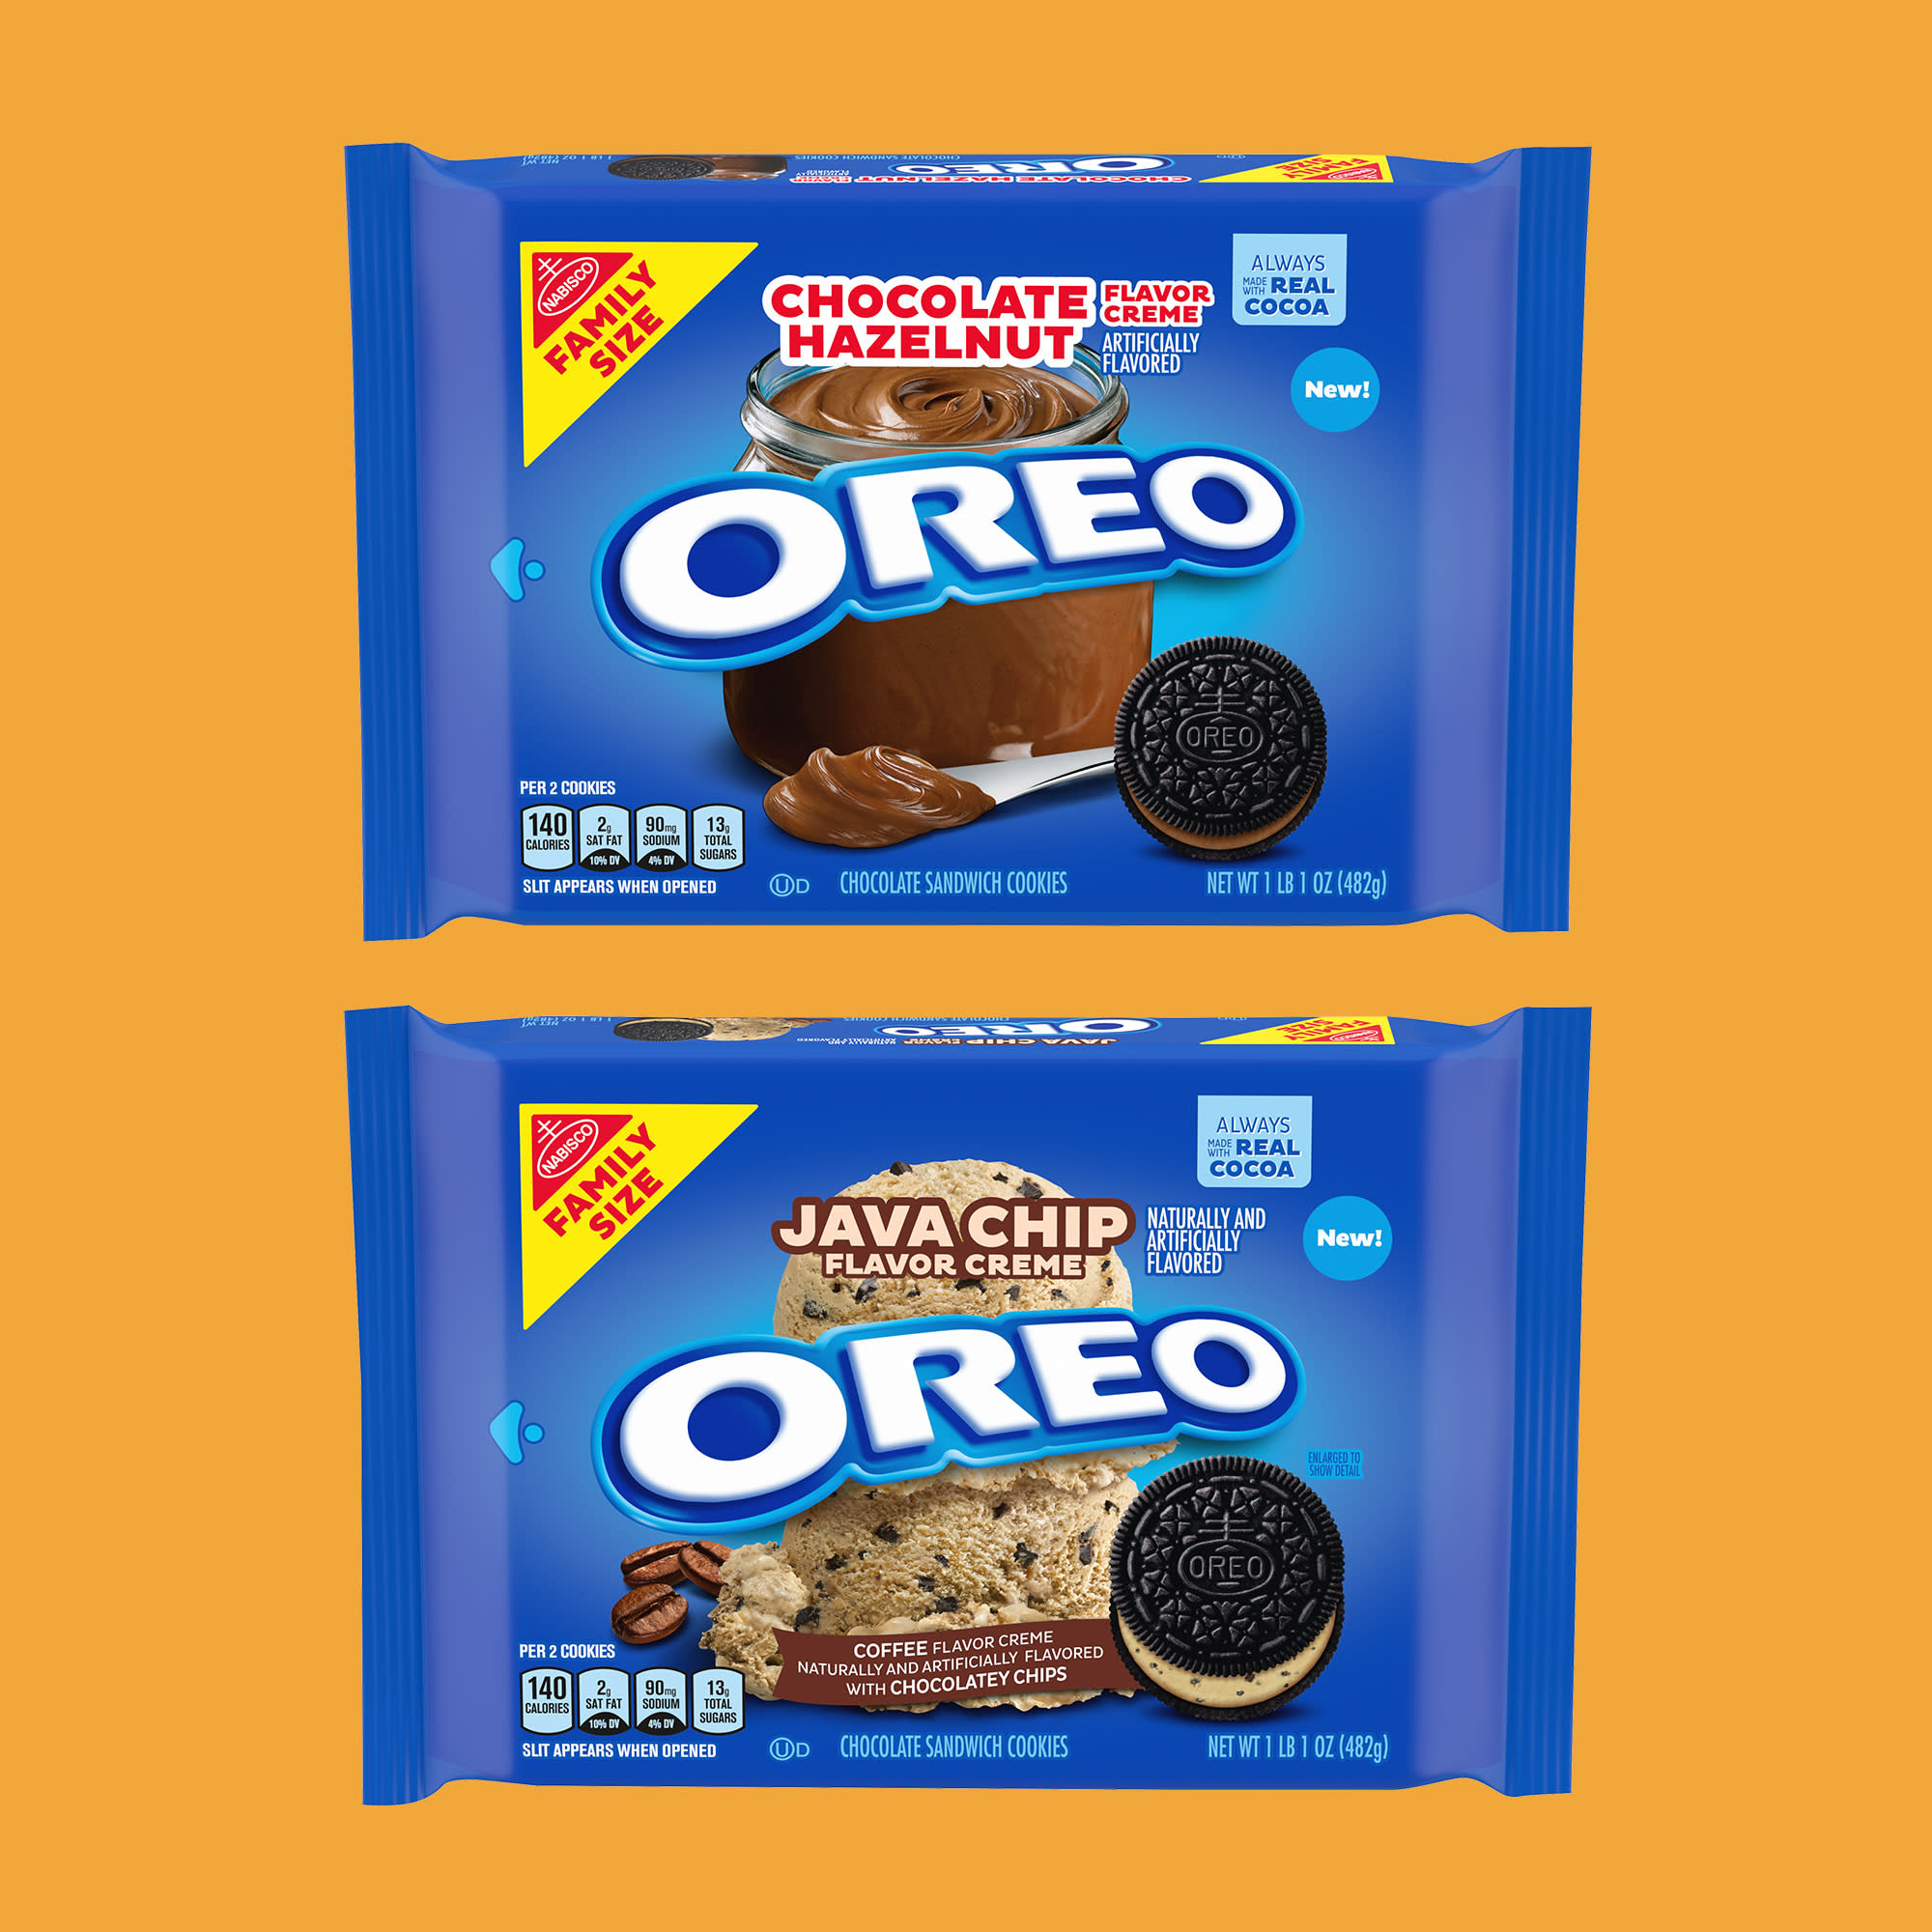 Oreo's newest cookie flavor looks like a coffee lover's dream